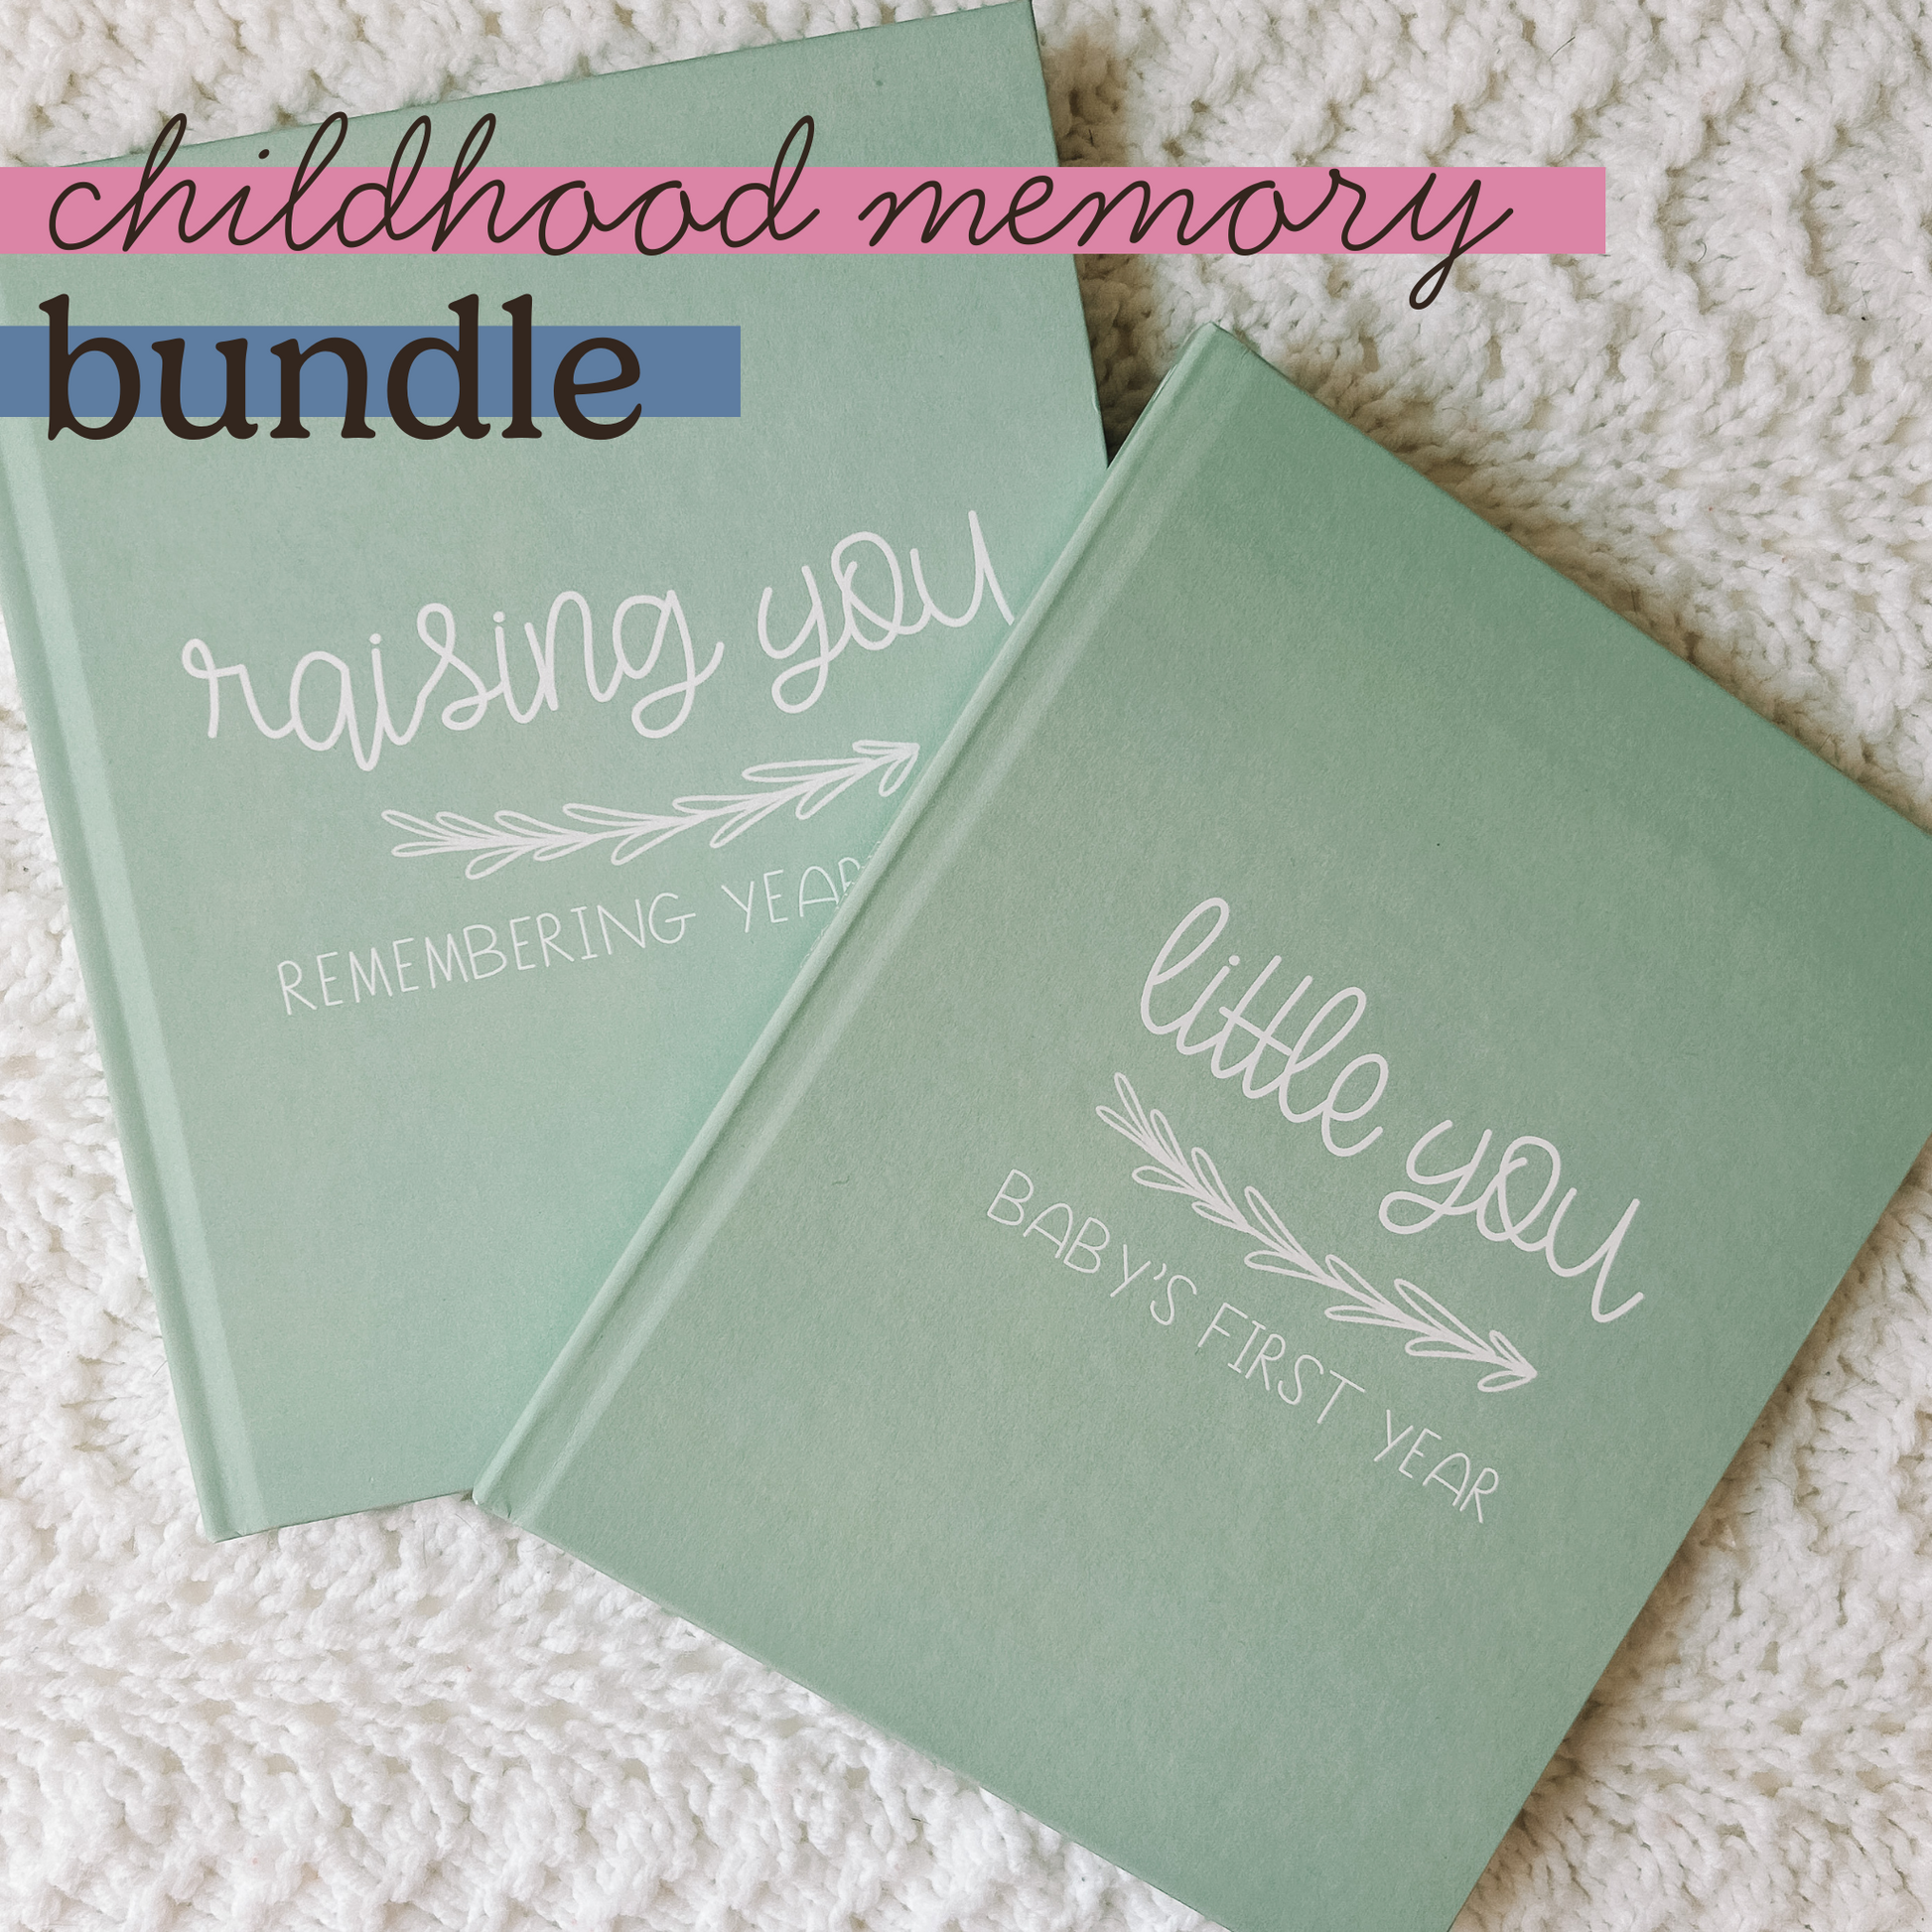 Childhood memory bundle includes Raising You Remembering Years 1-18 and Little You Baby's First Year.